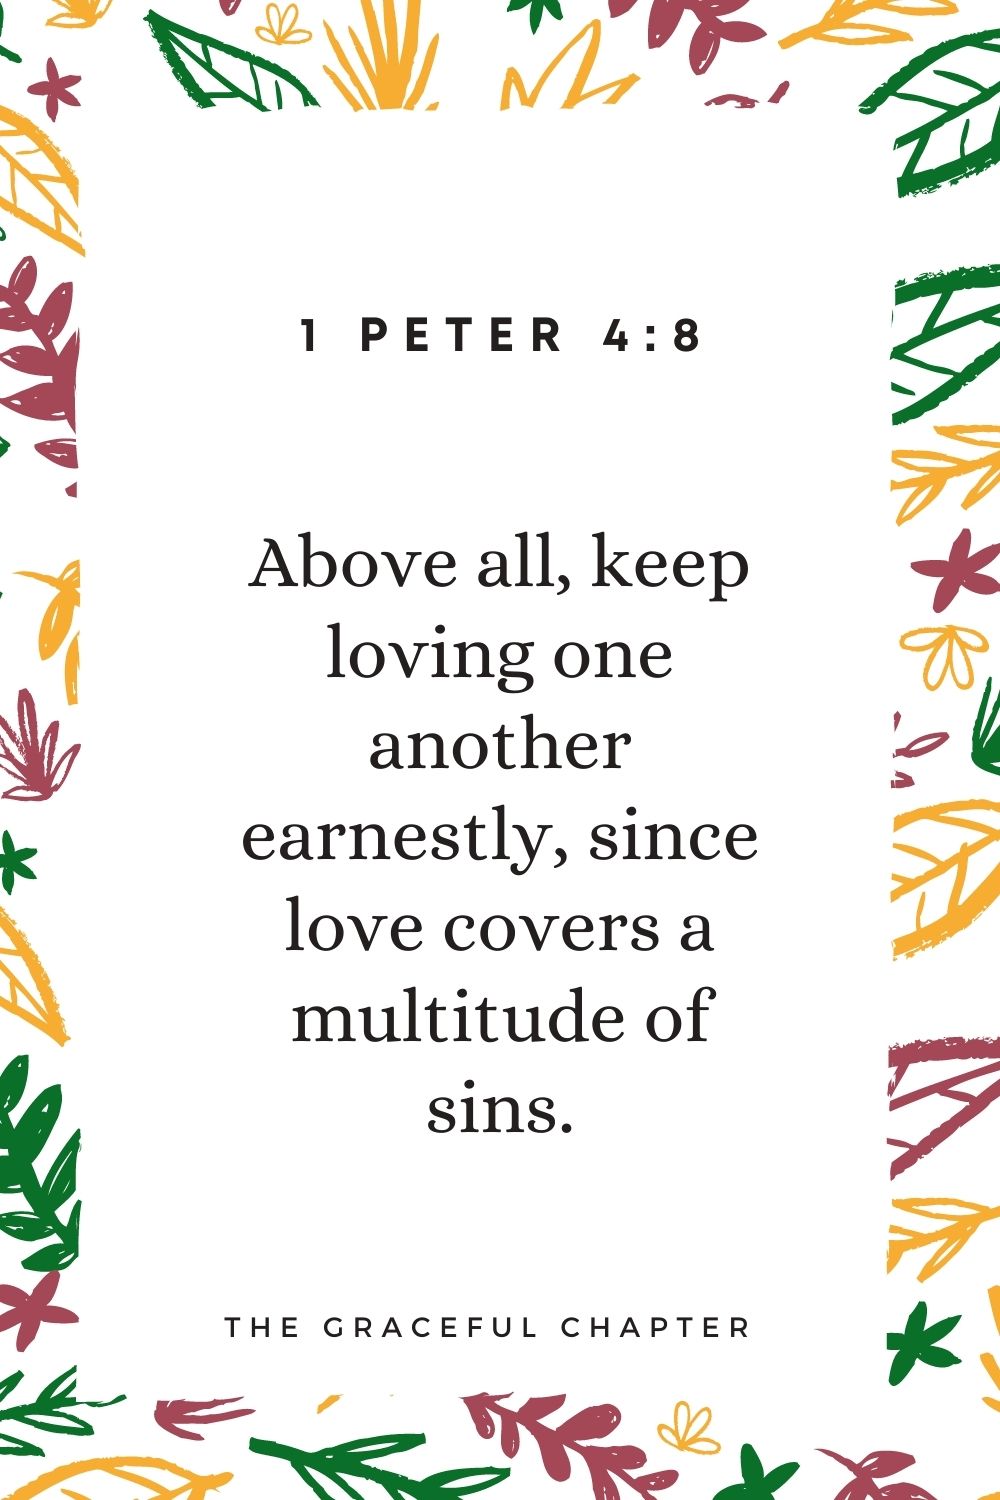 Above all, keep loving one another earnestly, since love covers a multitude of sins. 1 Peter 4:8